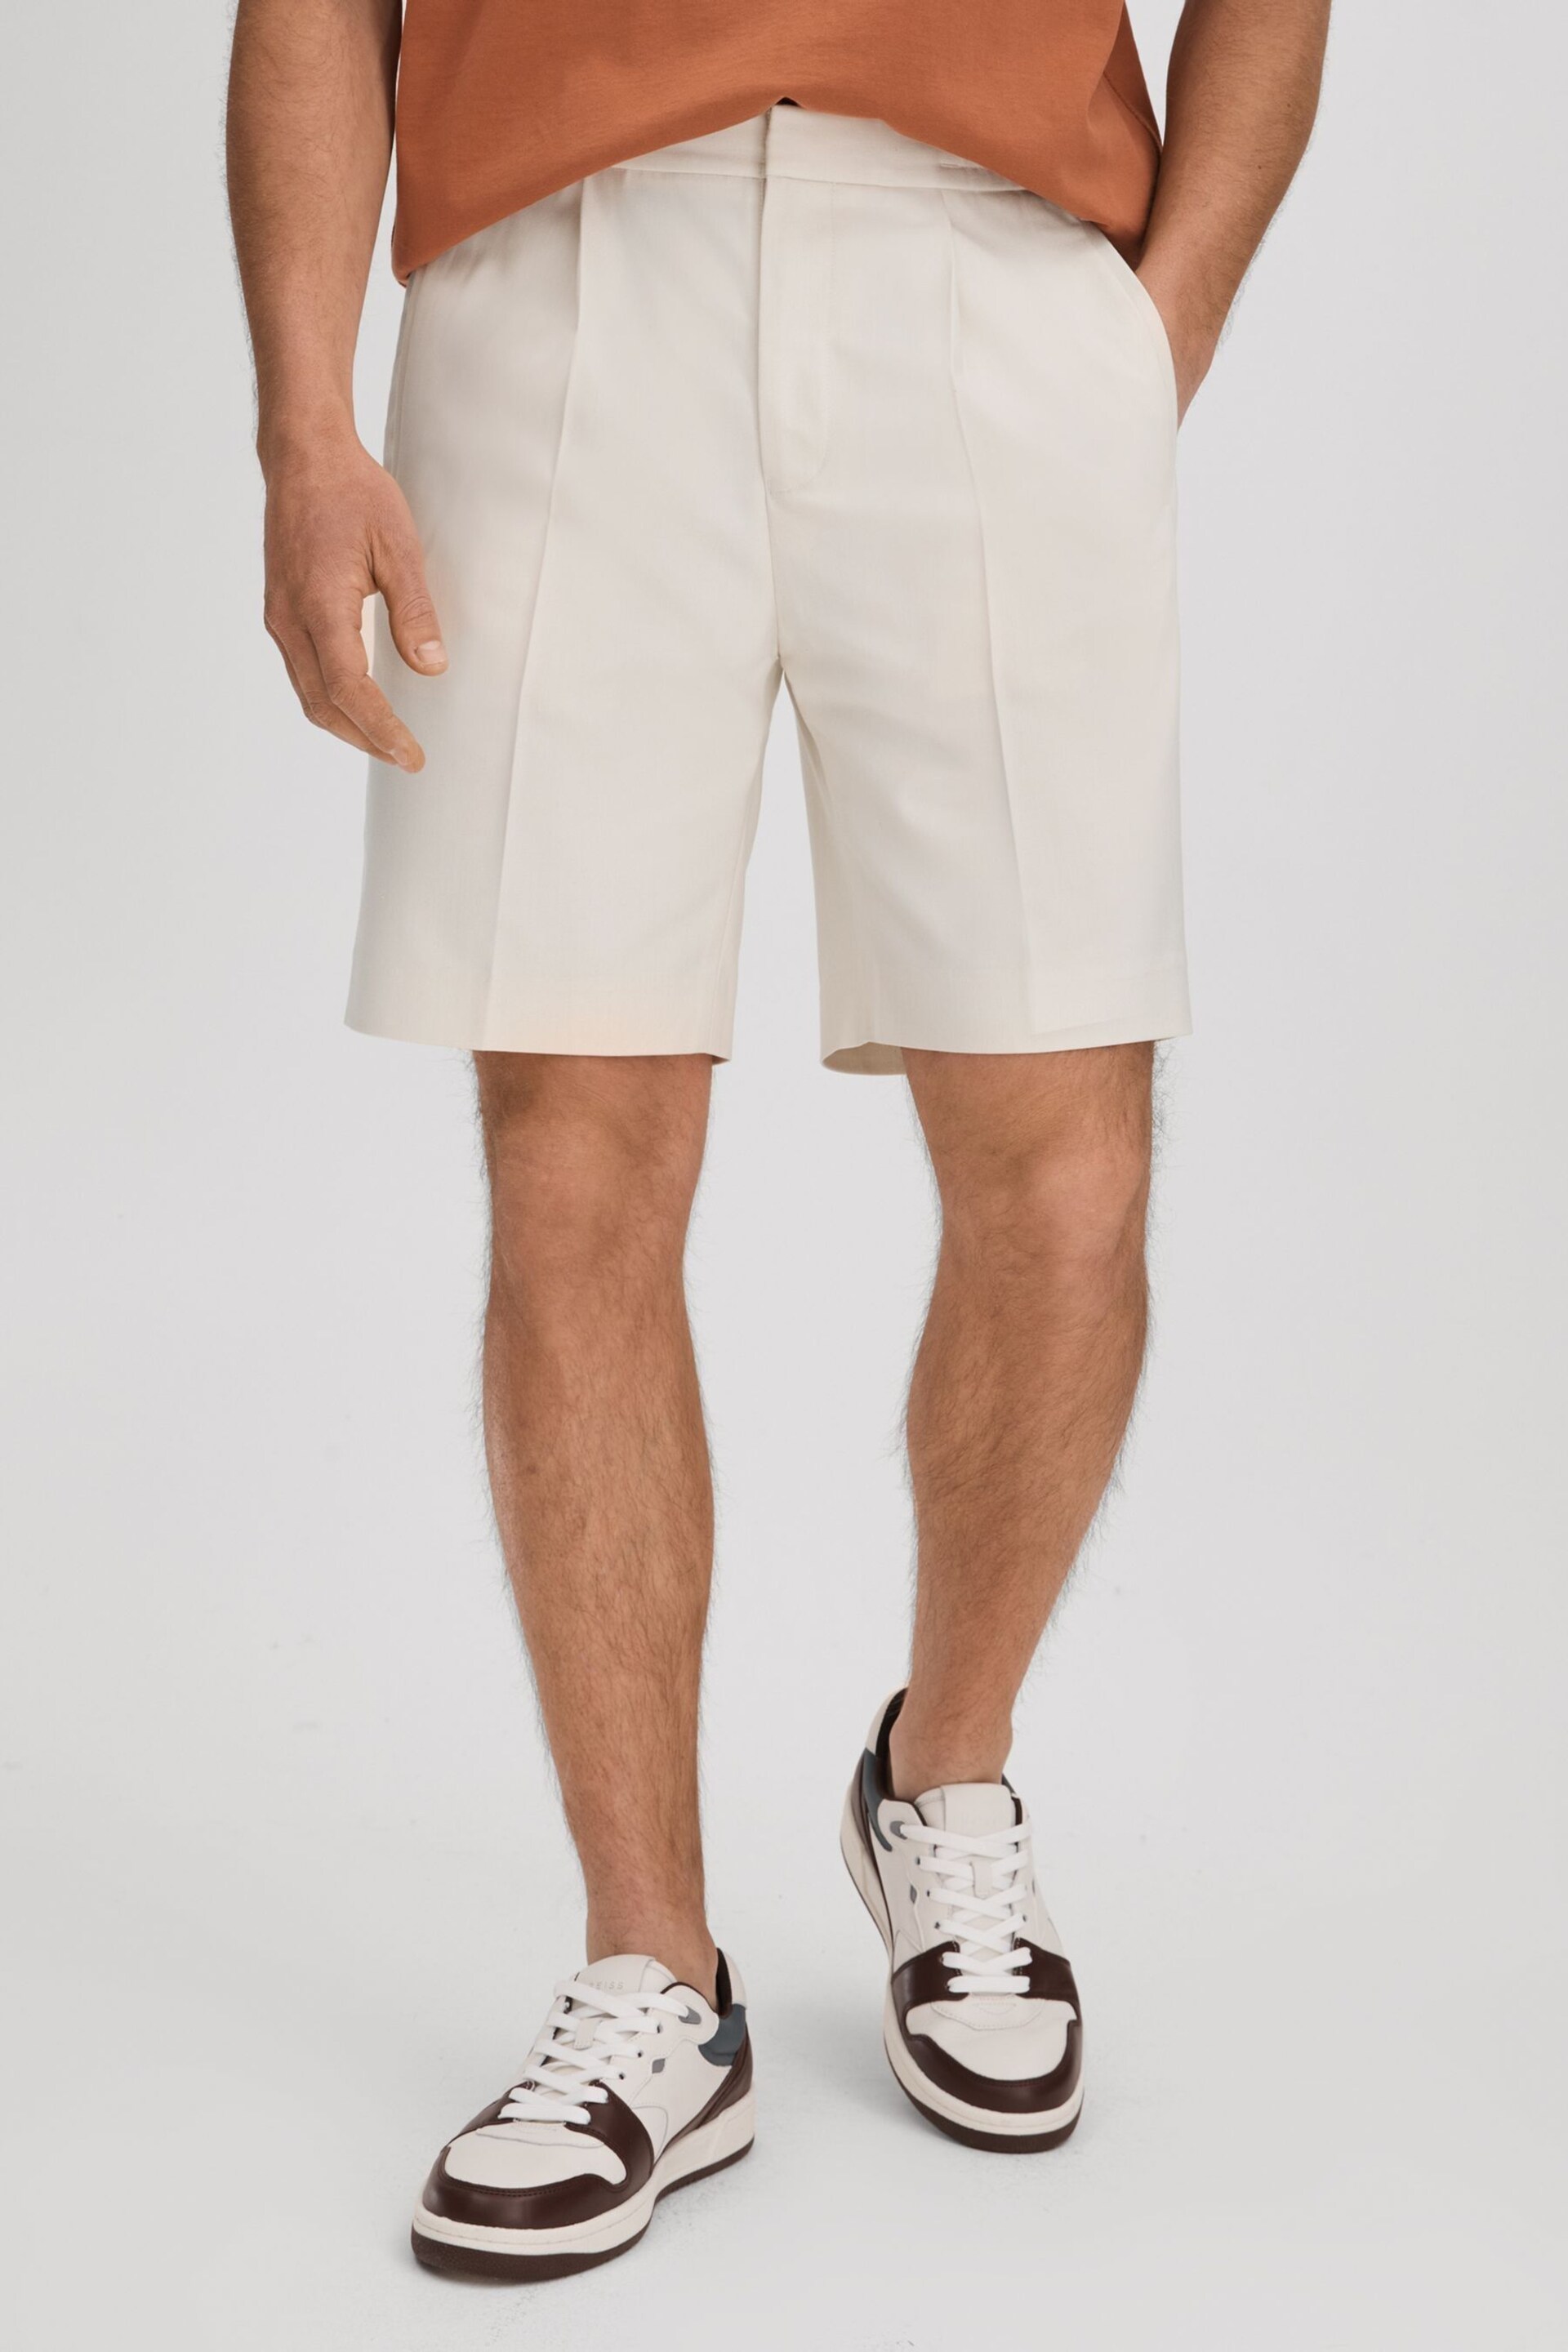 Reiss White Sussex Relaxed Drawstring Shorts - Image 1 of 6